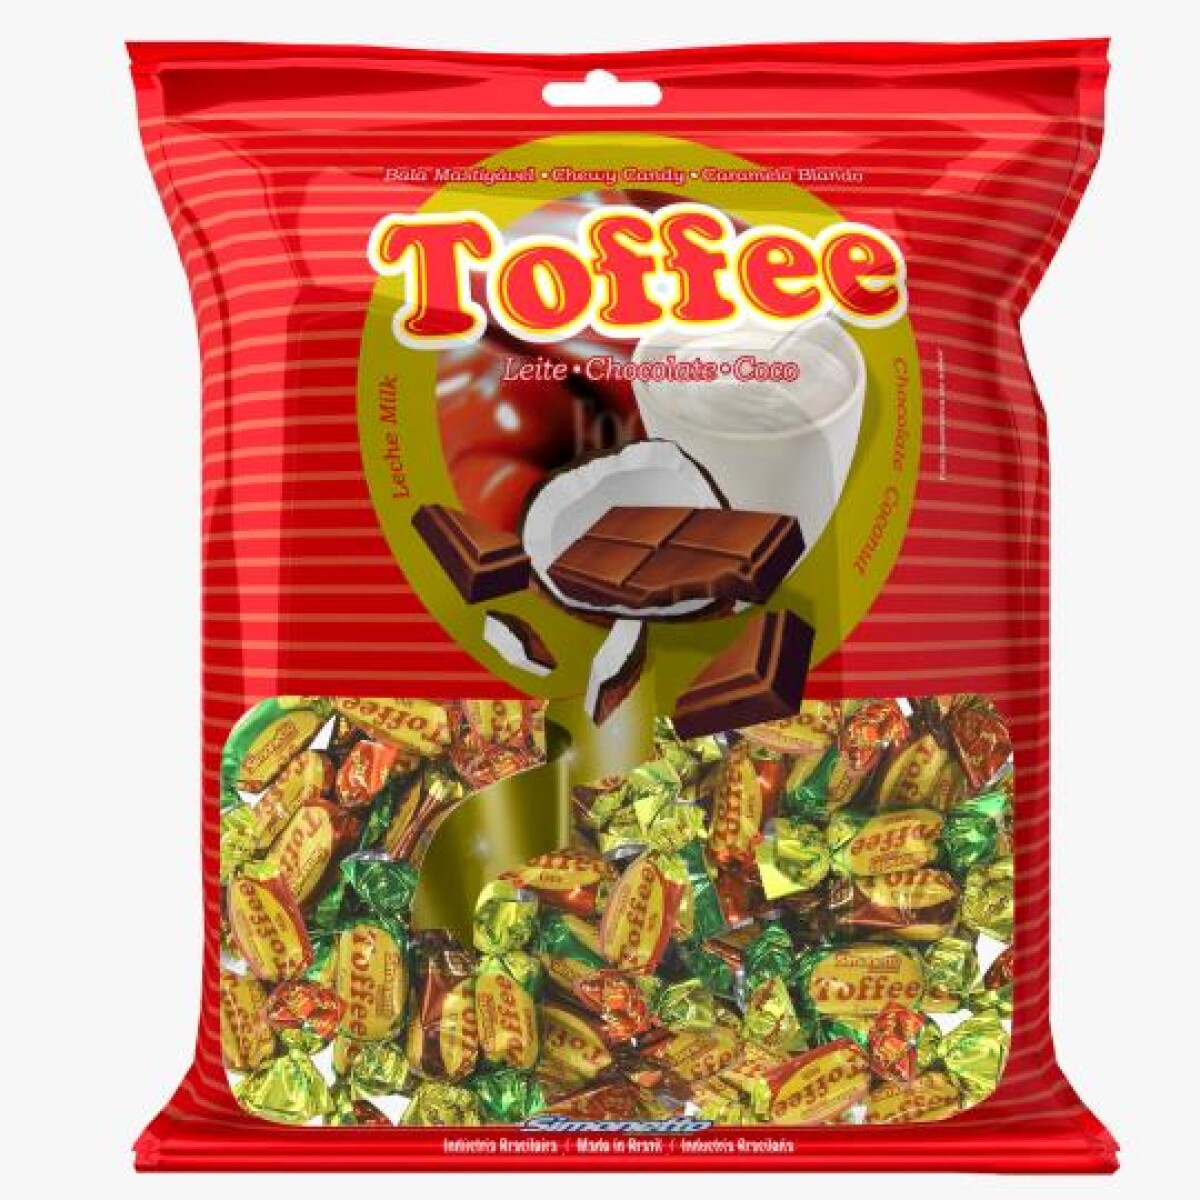 NAT-CARAMELO TOFFEE 300g 